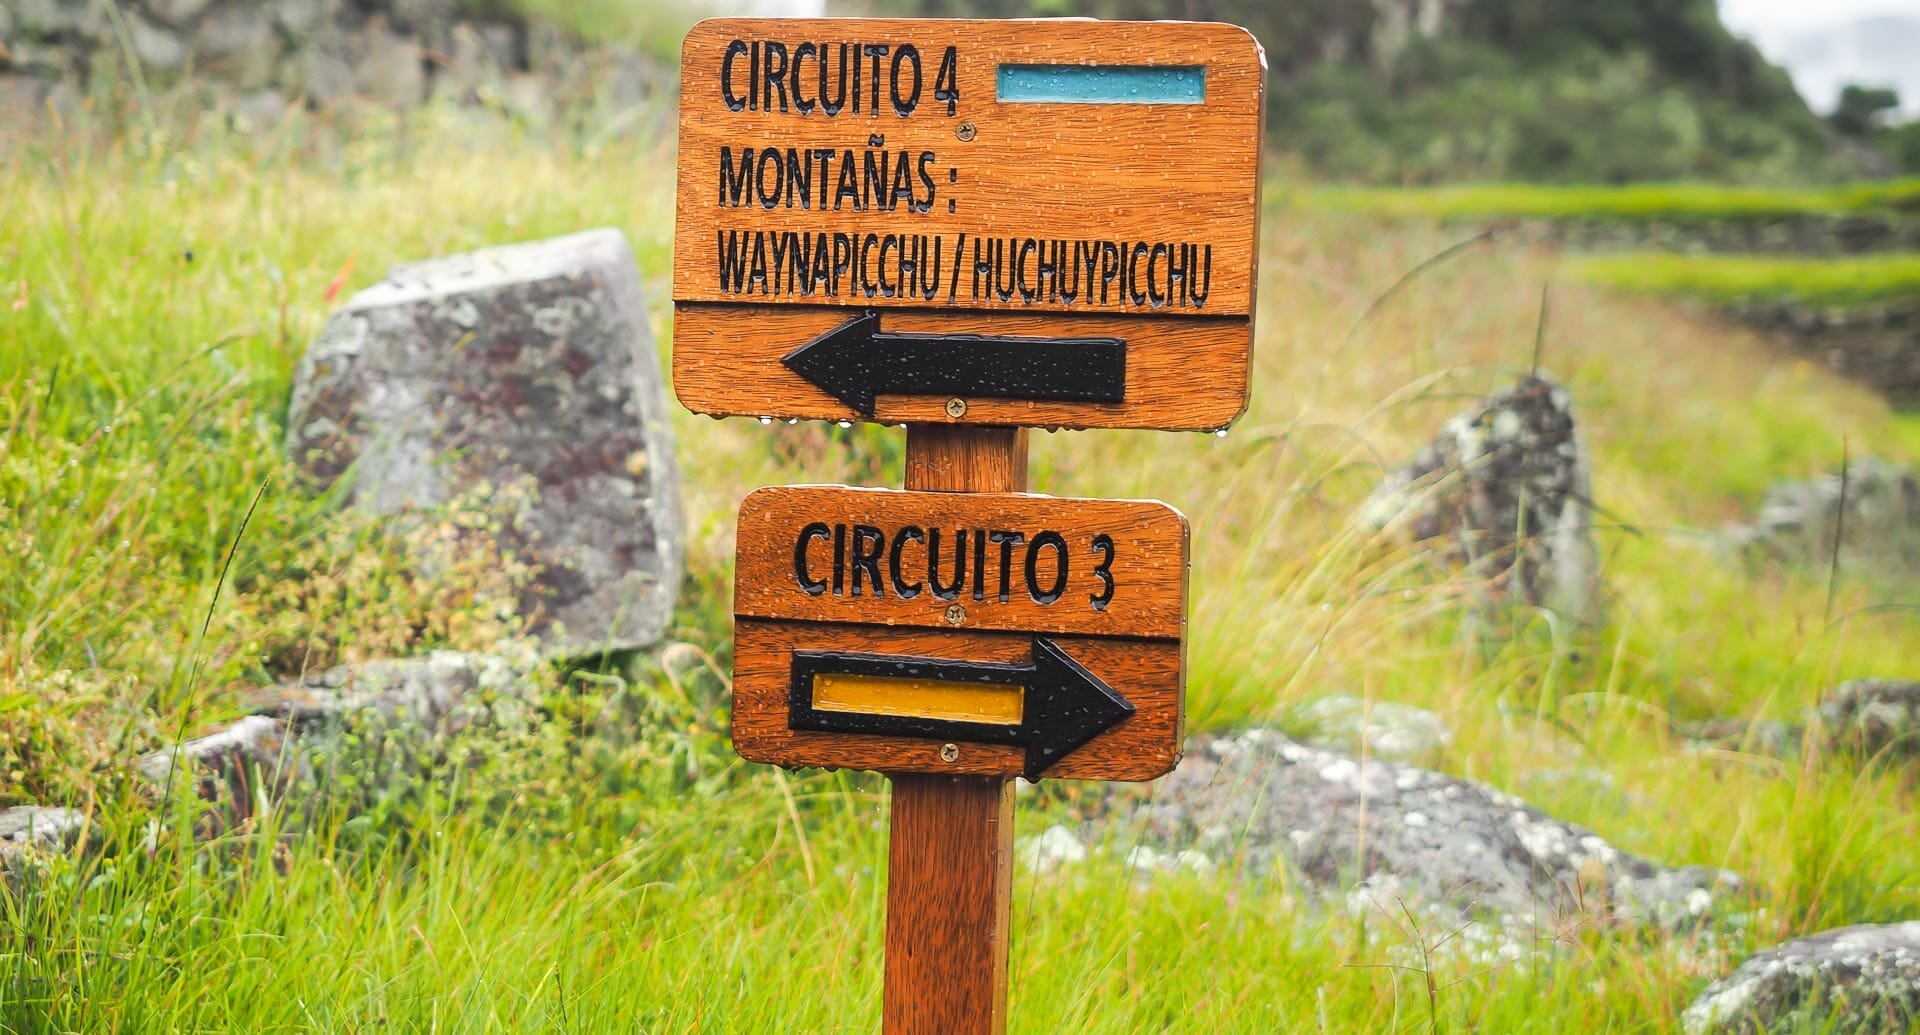 Machu Picchu Circuits Explained – Which One Is Best?